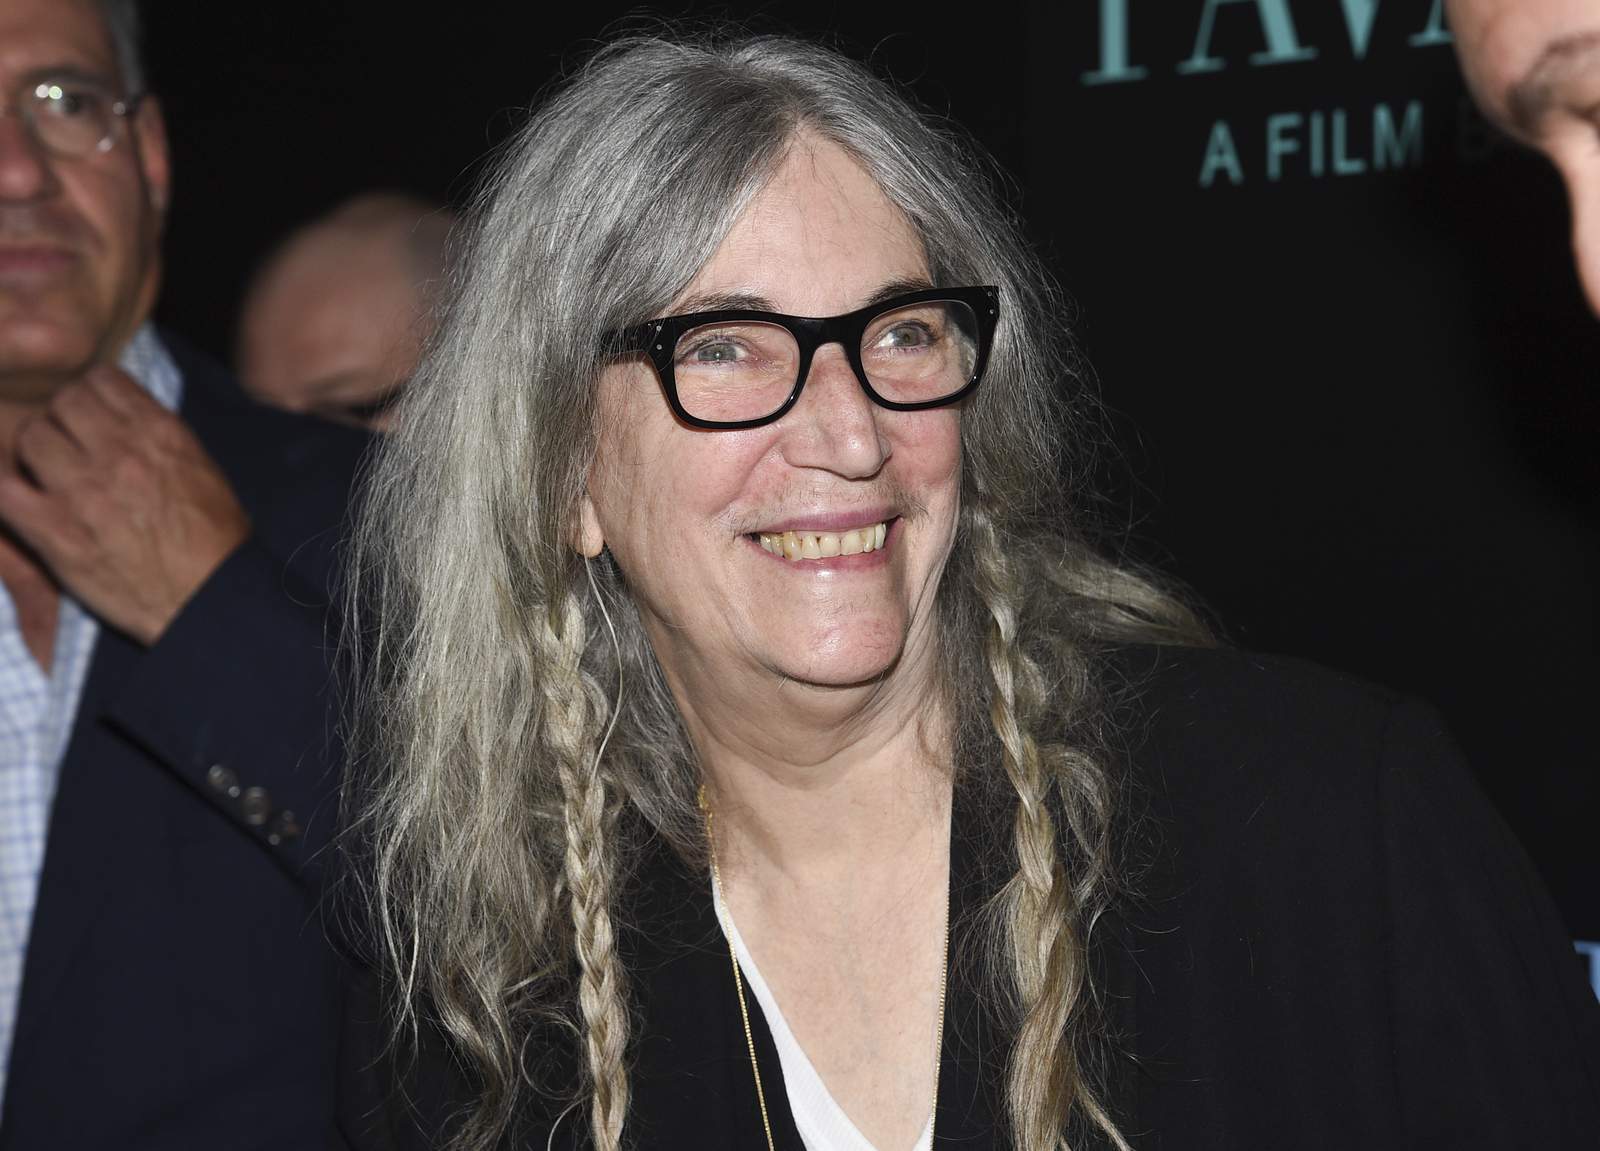 Patti Smith returns to singing live with Brooklyn concert